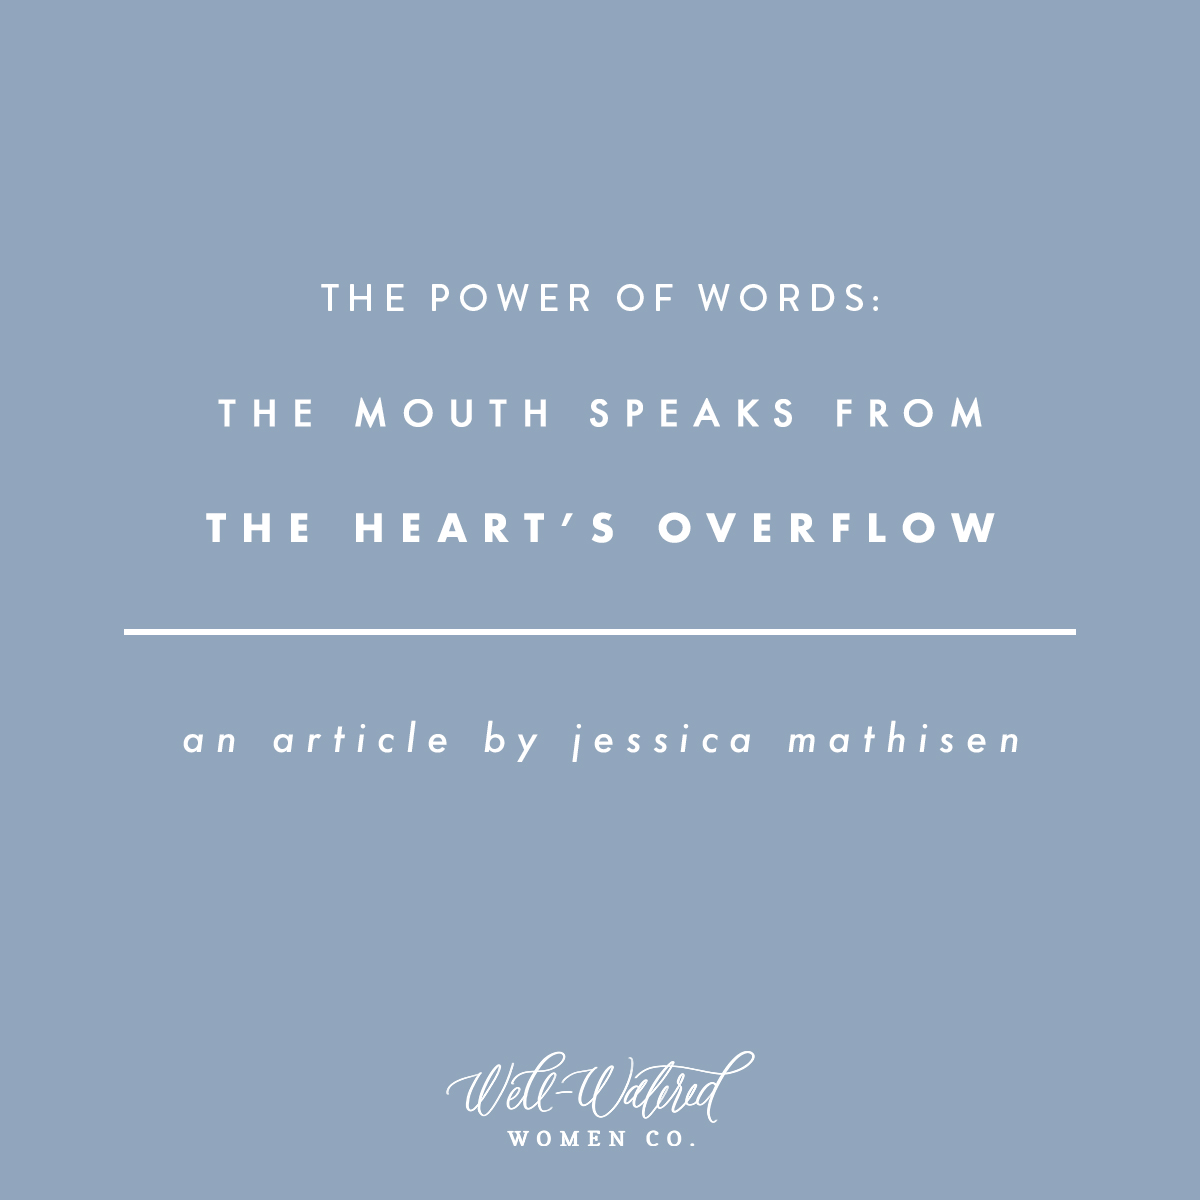 UPDATE-The Mouth Speaks from Hearts Overflow | Well-Watered Women Articles